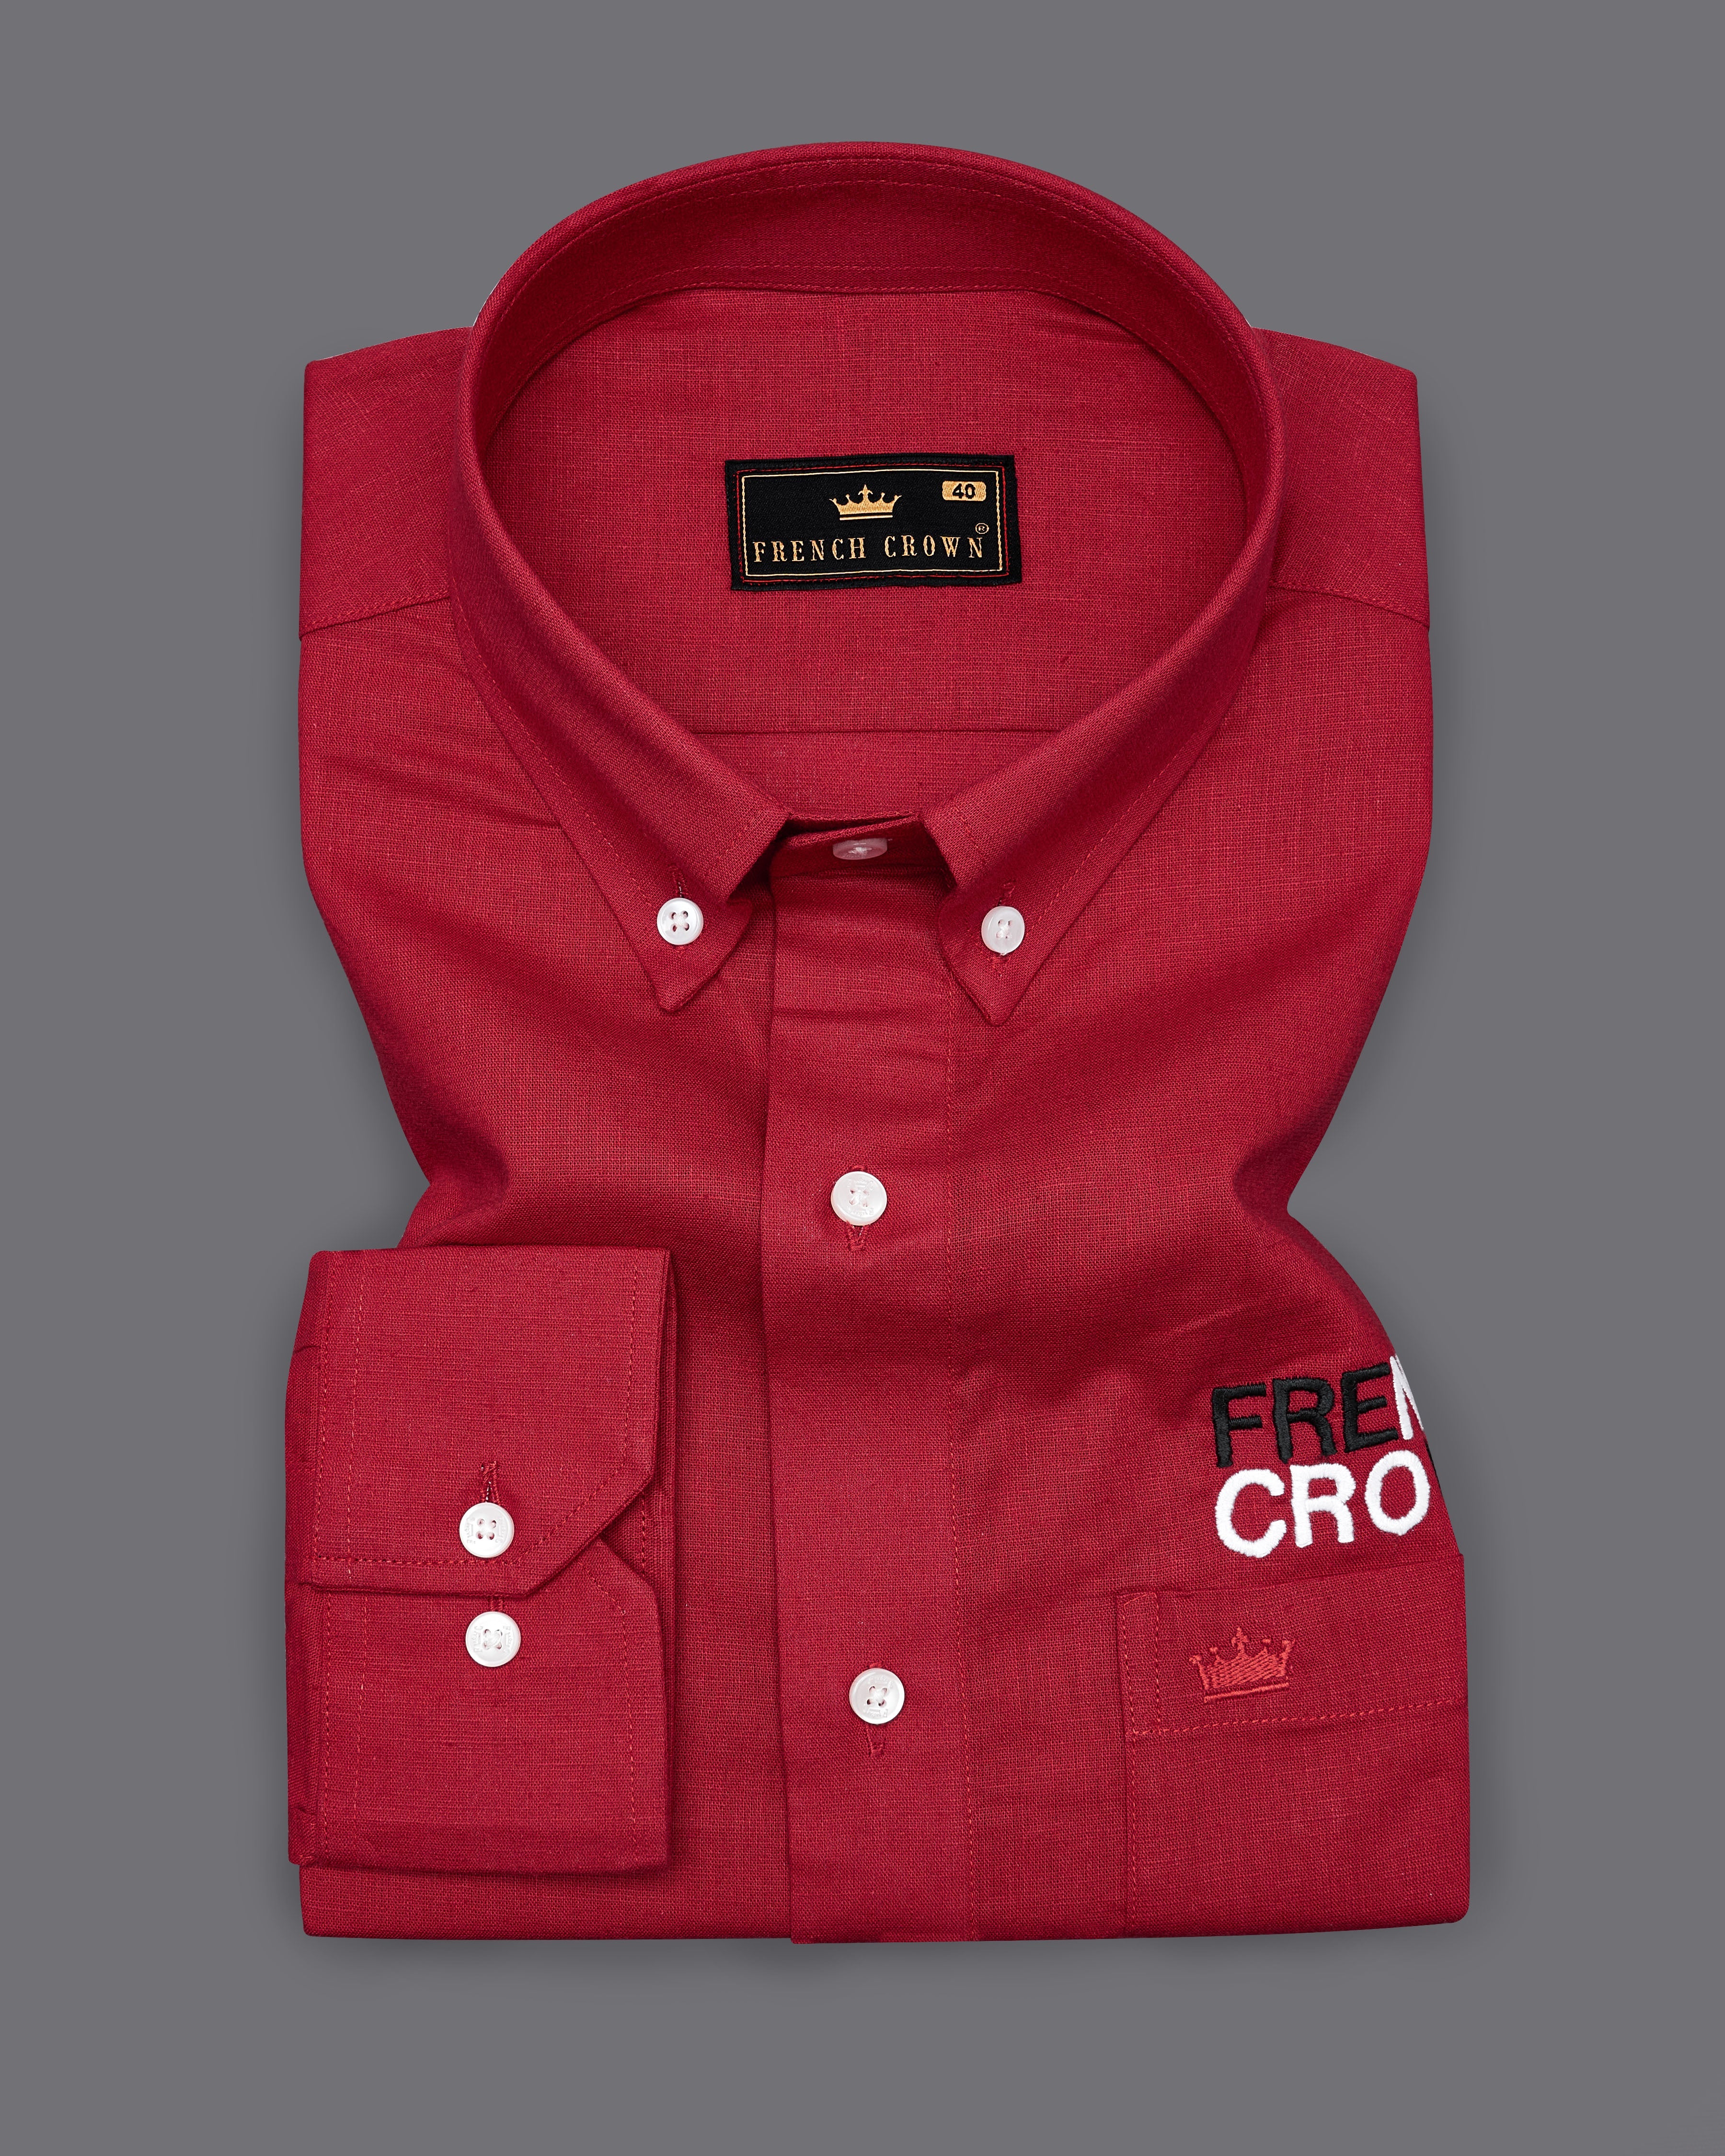 Cornell Red with Black and White Luxurious Linen  Embroidered Signature Shirt 5985-BD-E039-38, 5985-BD-E039-H-38, 5985-BD-E039-39, 5985-BD-E039-H-39, 5985-BD-E039-40, 5985-BD-E039-H-40, 5985-BD-E039-42, 5985-BD-E039-H-42, 5985-BD-E039-44, 5985-BD-E039-H-44, 5985-BD-E039-46, 5985-BD-E039-H-46, 5985-BD-E039-48, 5985-BD-E039-H-48, 5985-BD-E039-50, 5985-BD-E039-H-50, 5985-BD-E039-52, 5985-BD-E039-H-52